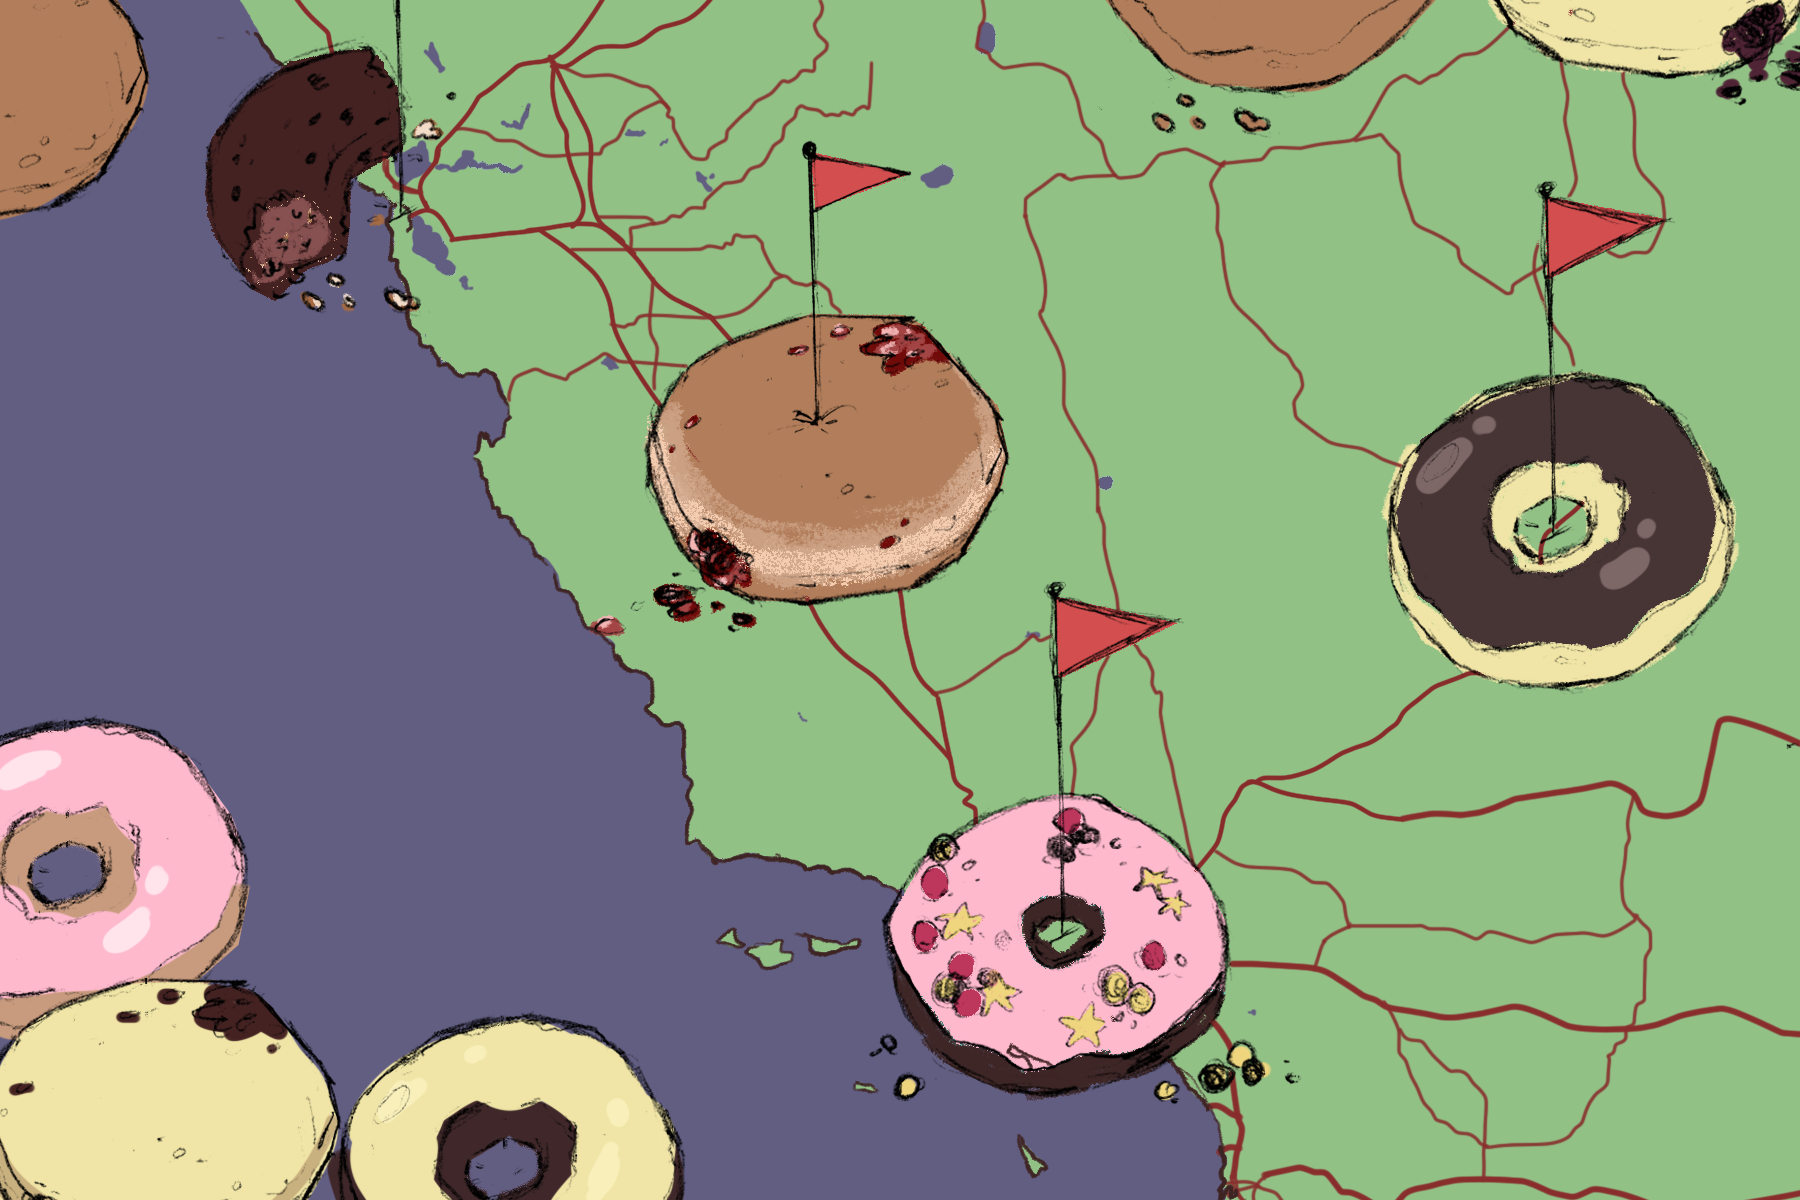 In an article about West Coast donuts, a map of the West Coast marked by different flavors of donuts.